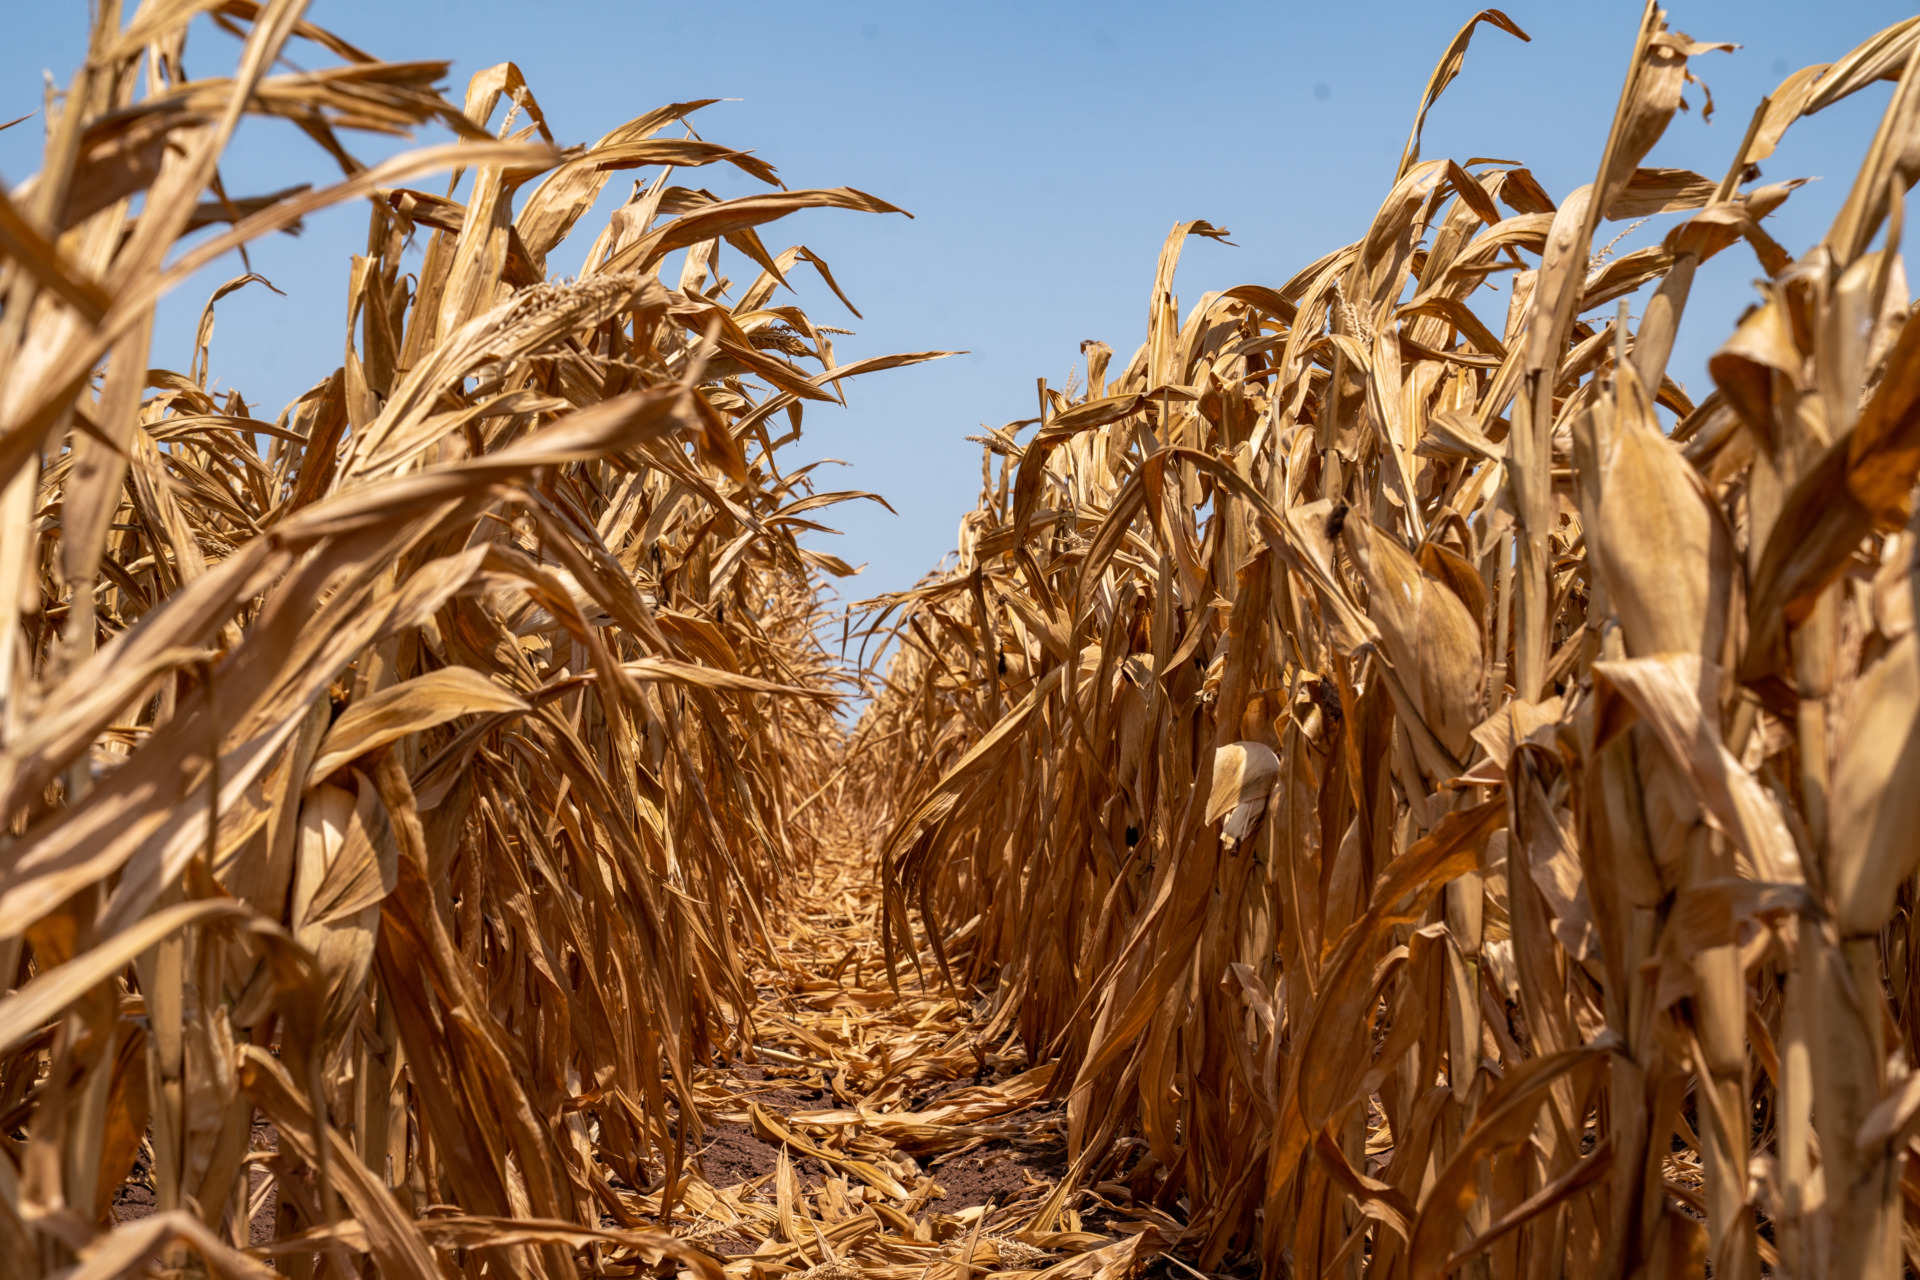 Texas summer drought affecting corn, sorghum crops - AgriLife Today